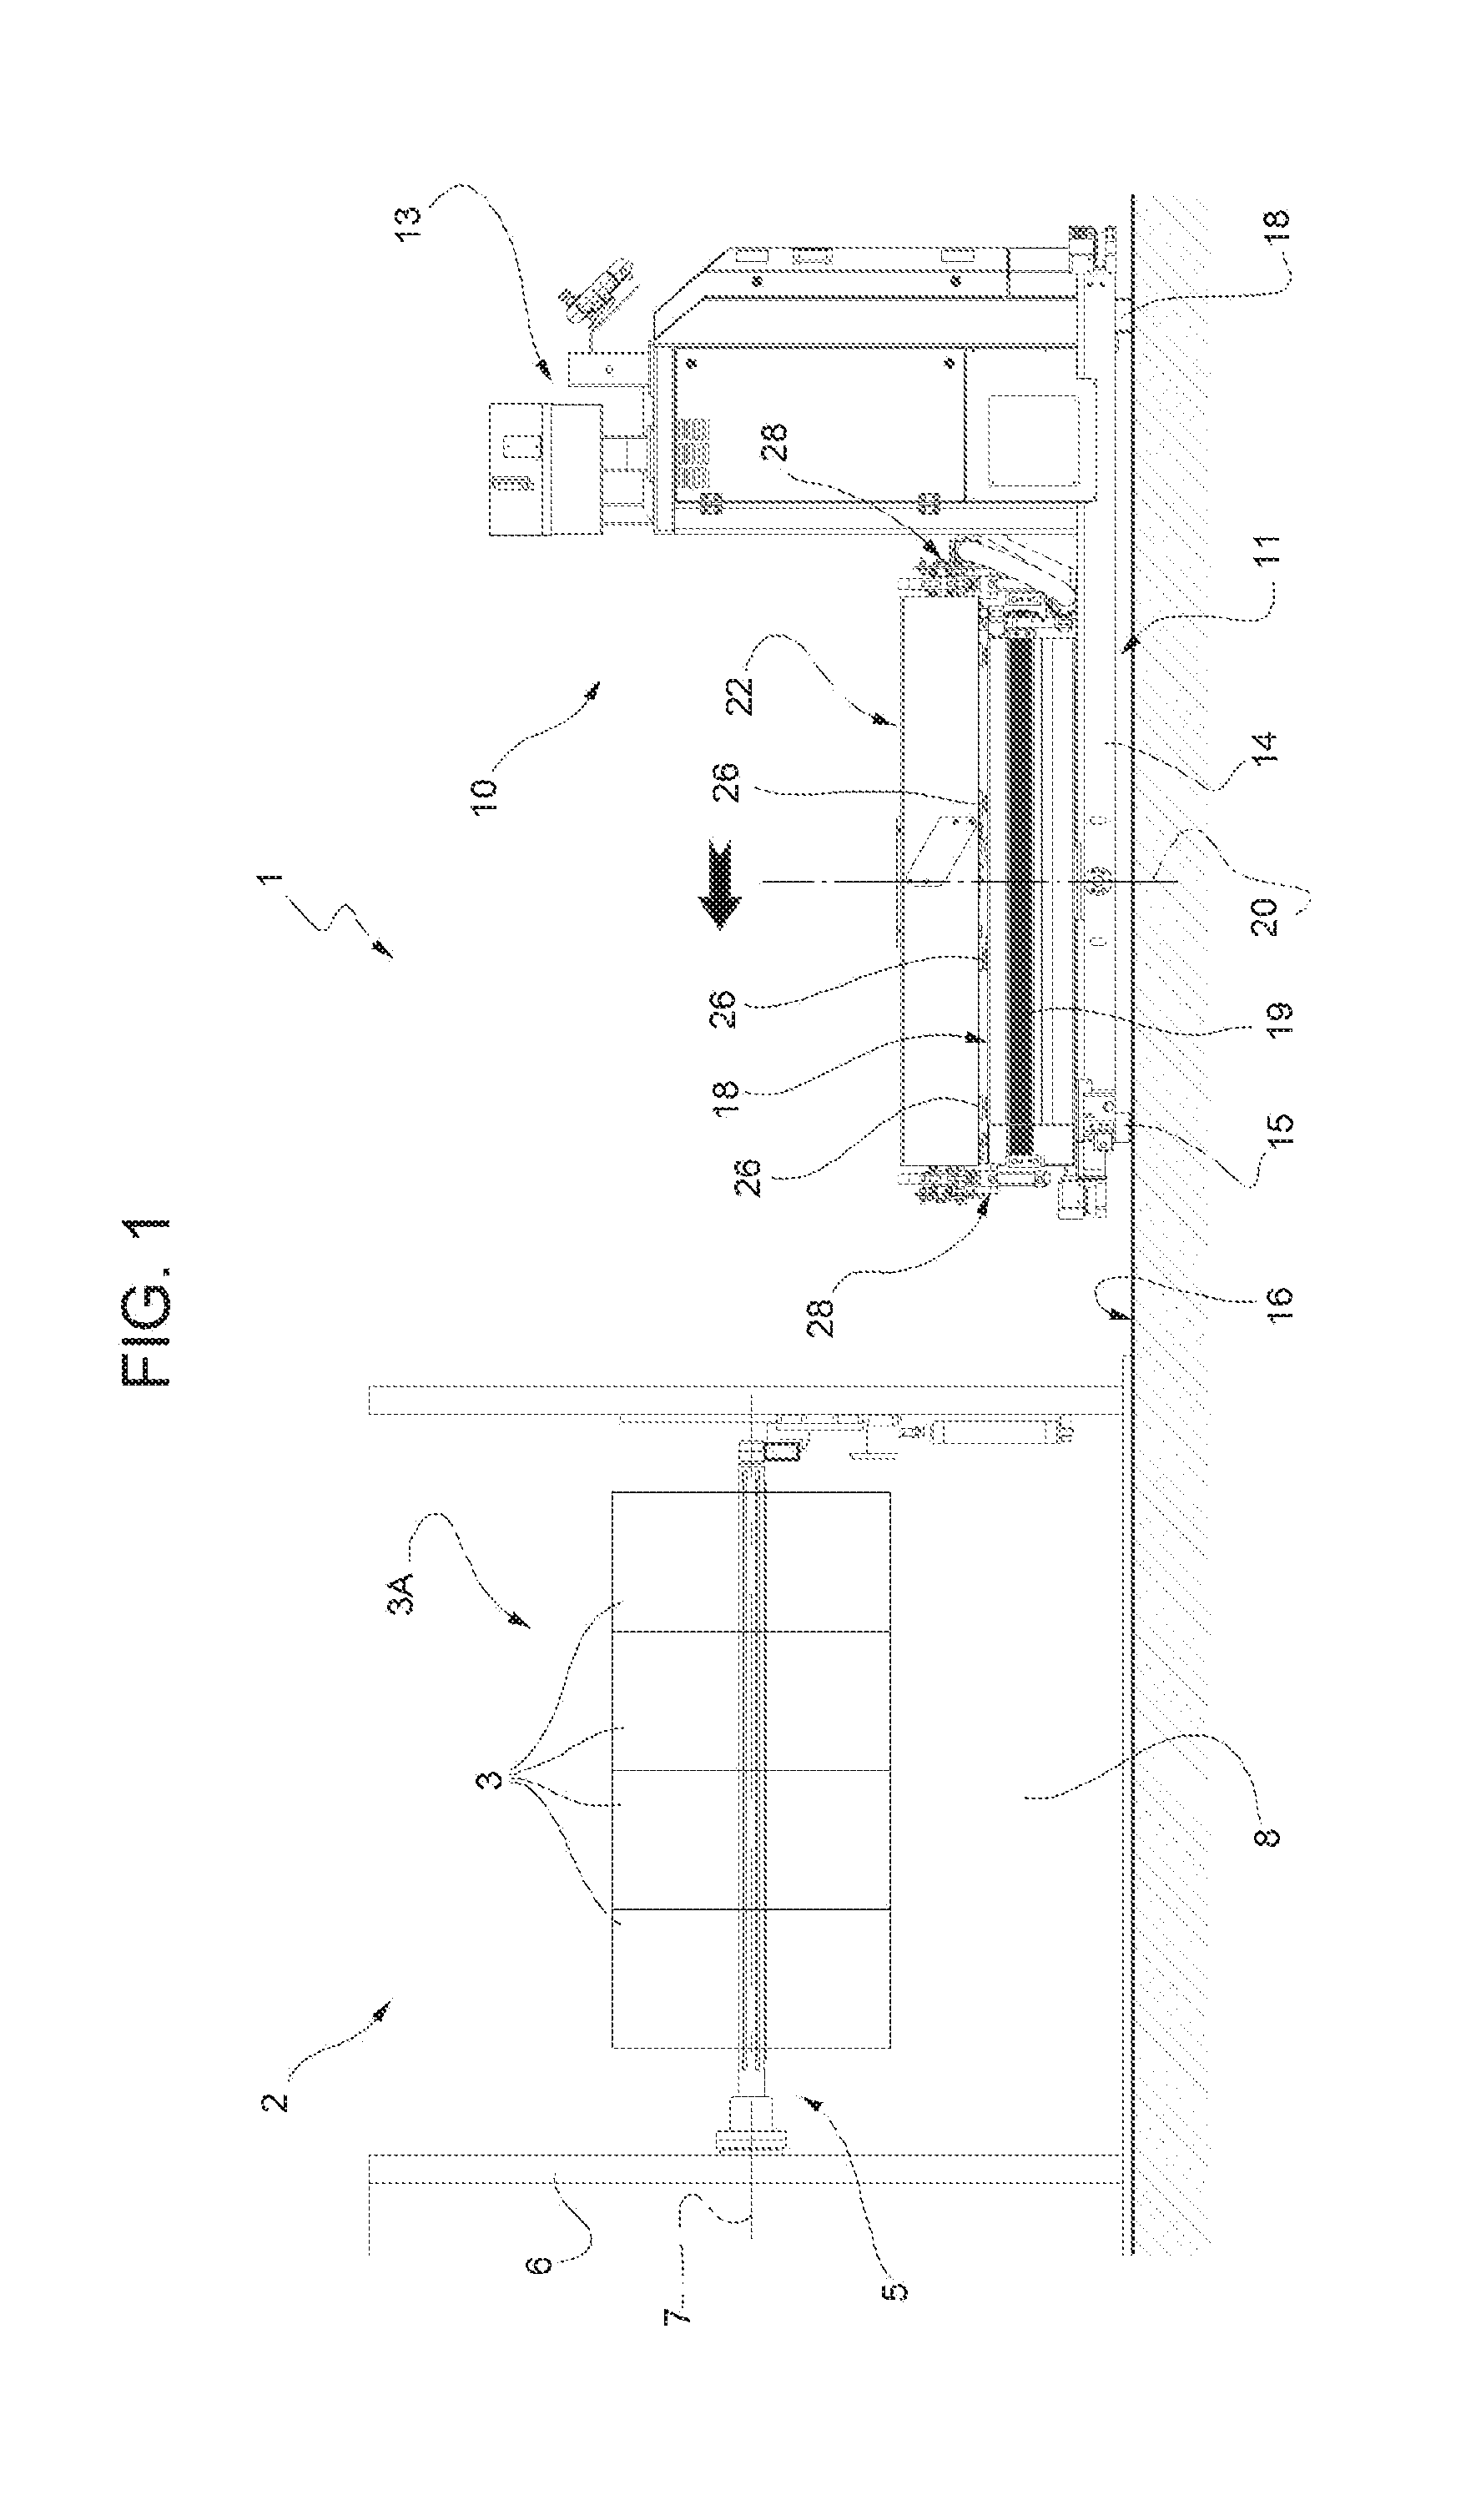 Method and machine for discharging a roll of tape from a winding spindle